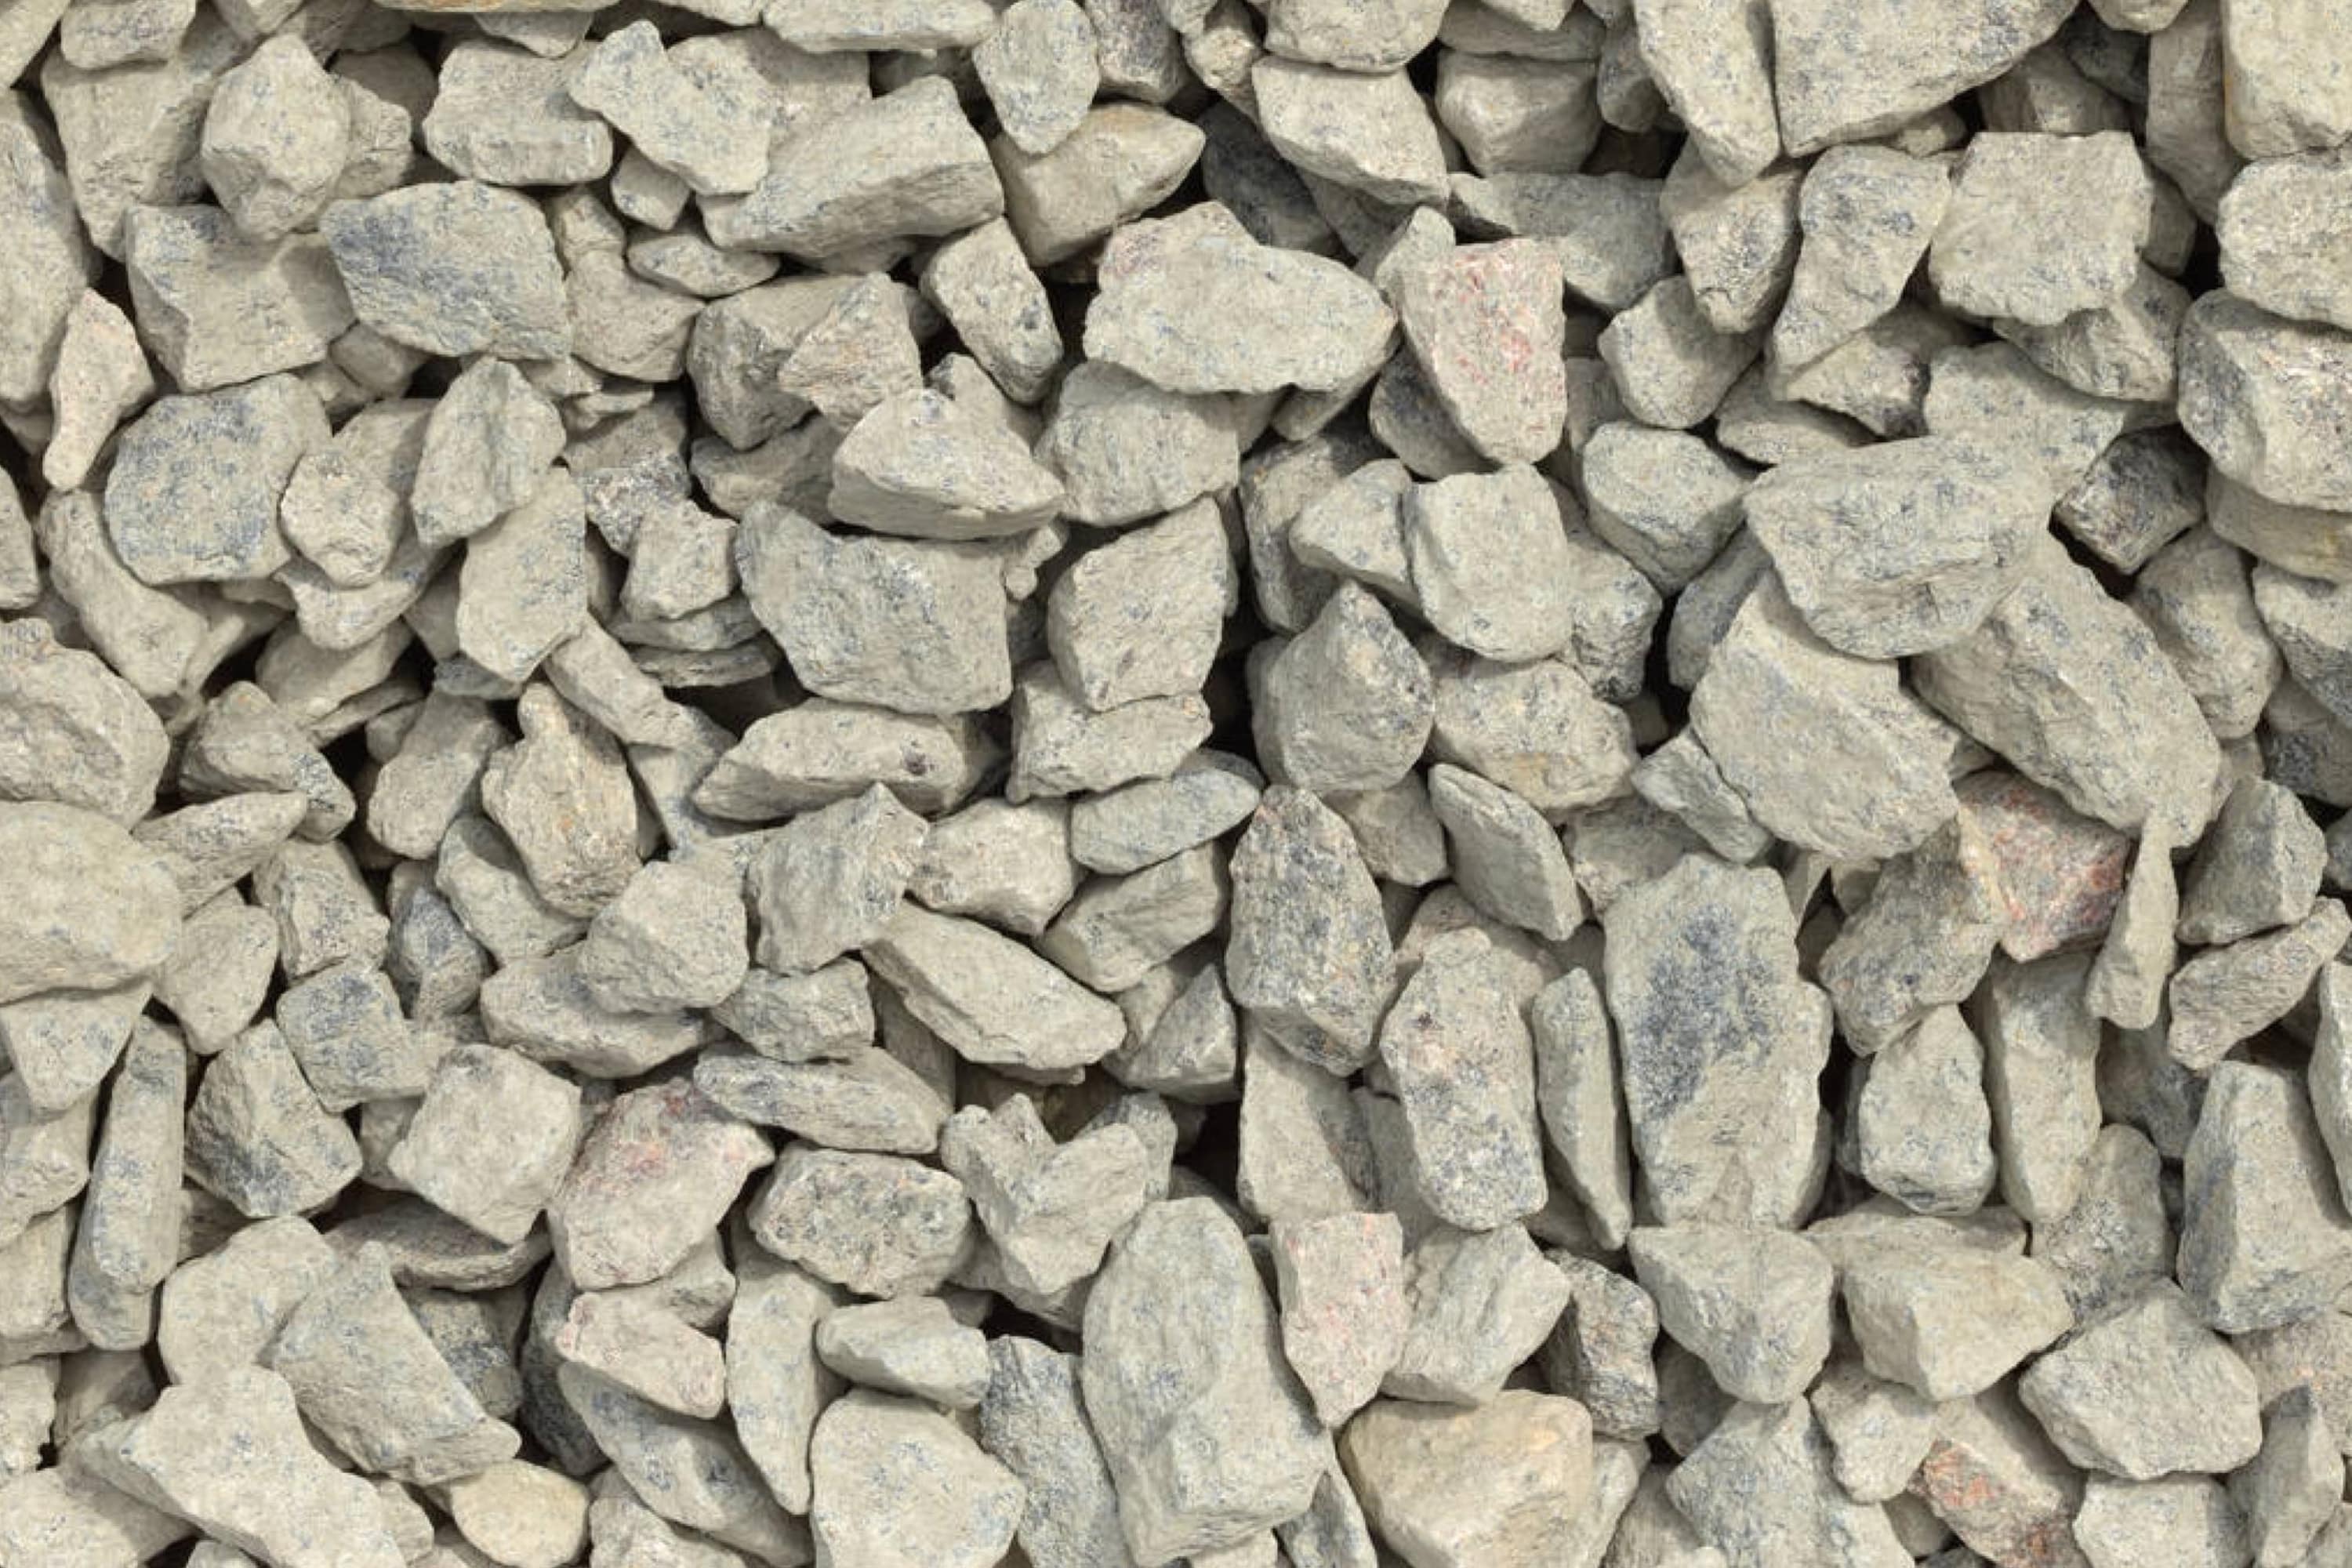 How to Grade a Gravel Driveway